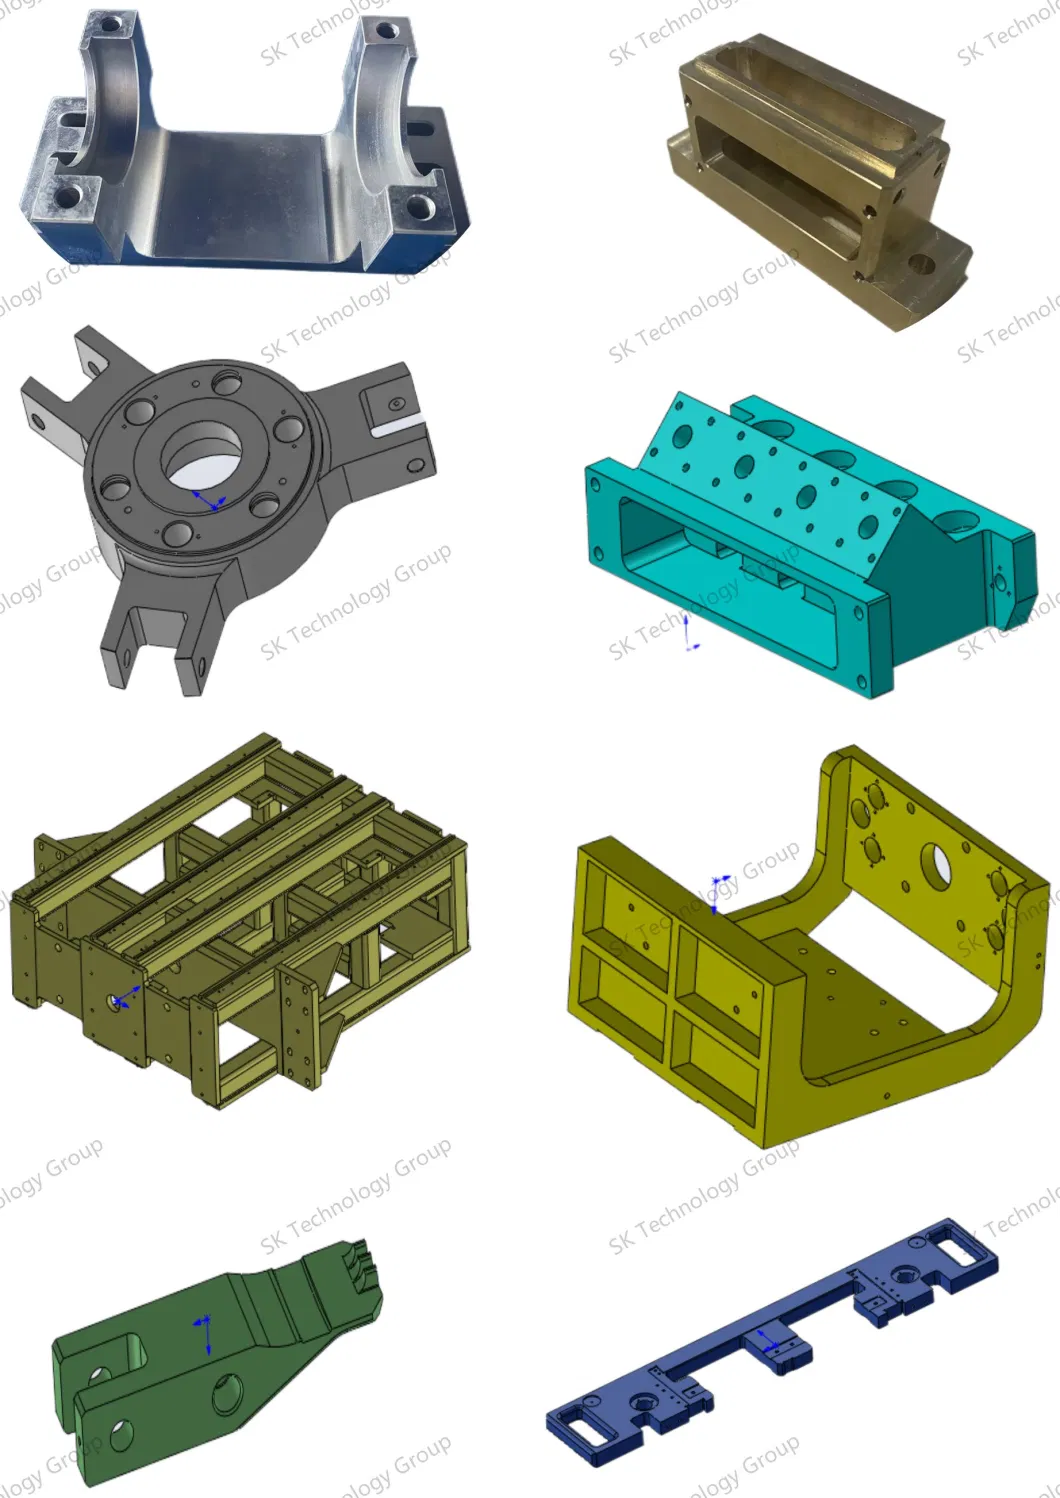 OEM Aluminum Parts of Precision Metal Hardware /Auto/Machinery From Aluminium CNC Machining/Machined /Machinery /Milling/Turning /Lathe Die Casting Service